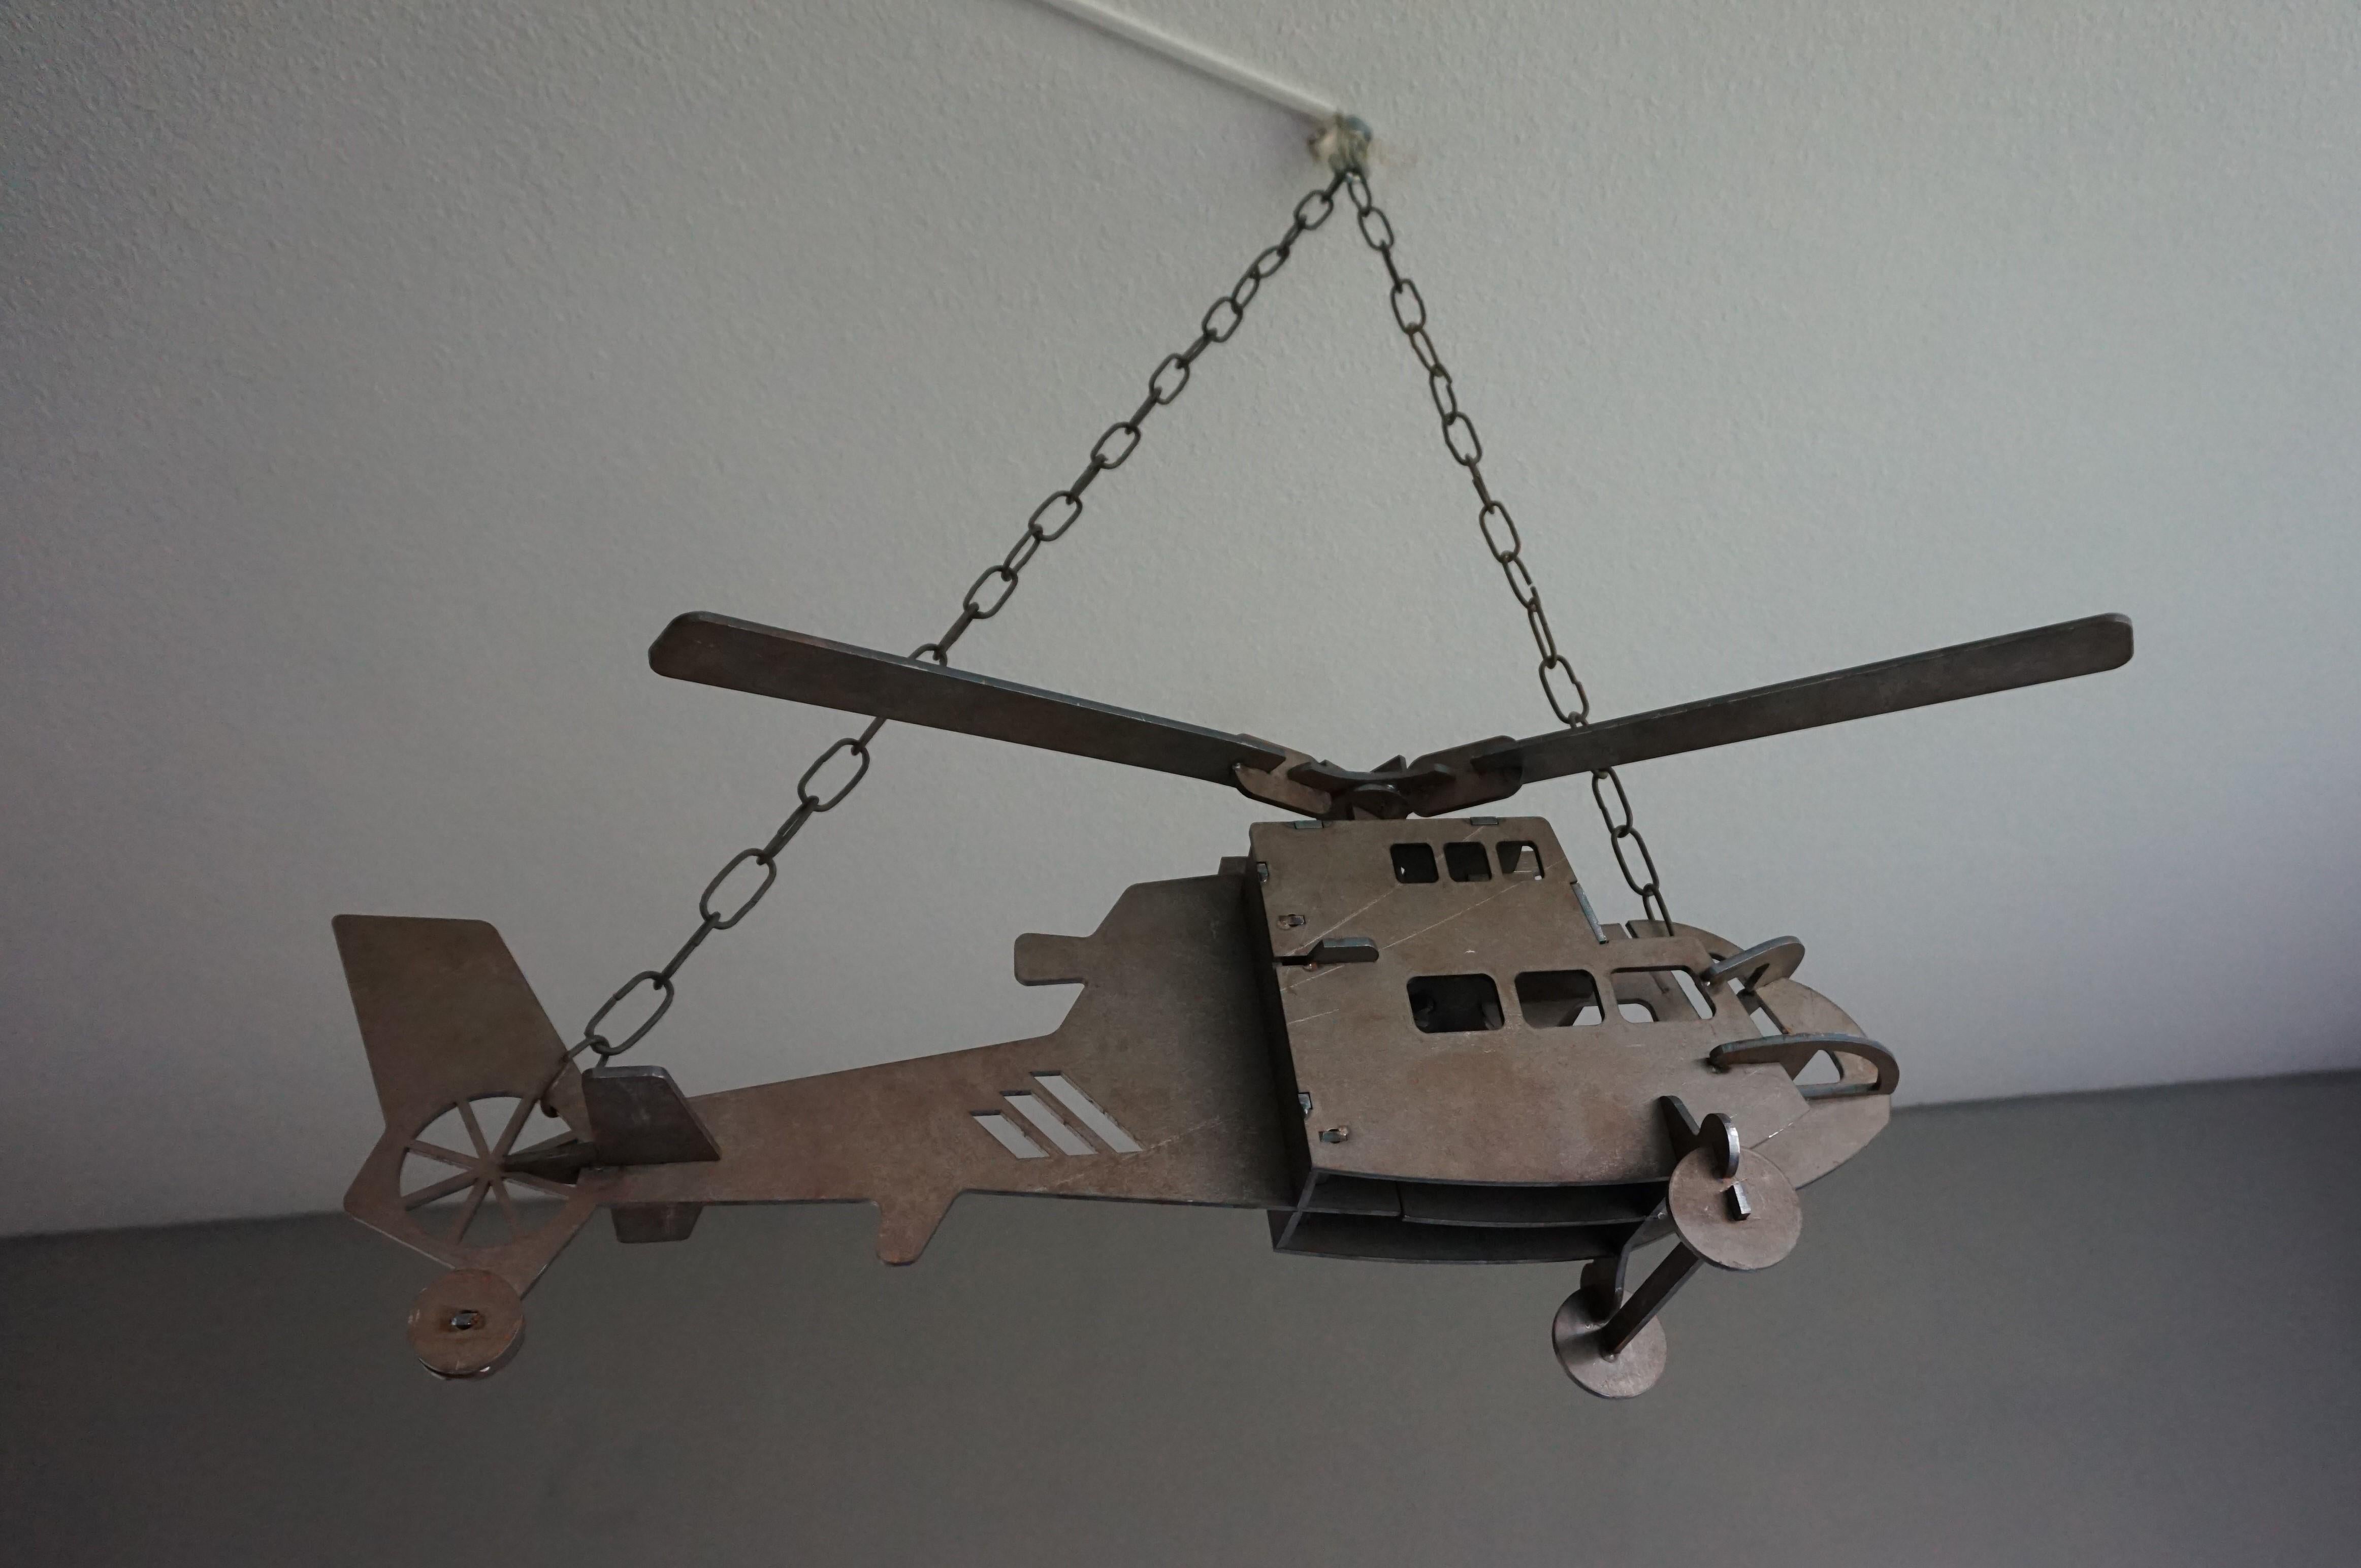 Ultimate man cave decoration that could also be turned into a light fixture.

This perfect size and all-handcrafted model helicopter was made on one of Holland's airbases. It is a one-of-a-kind that was made somewhere in the second half of the 20th